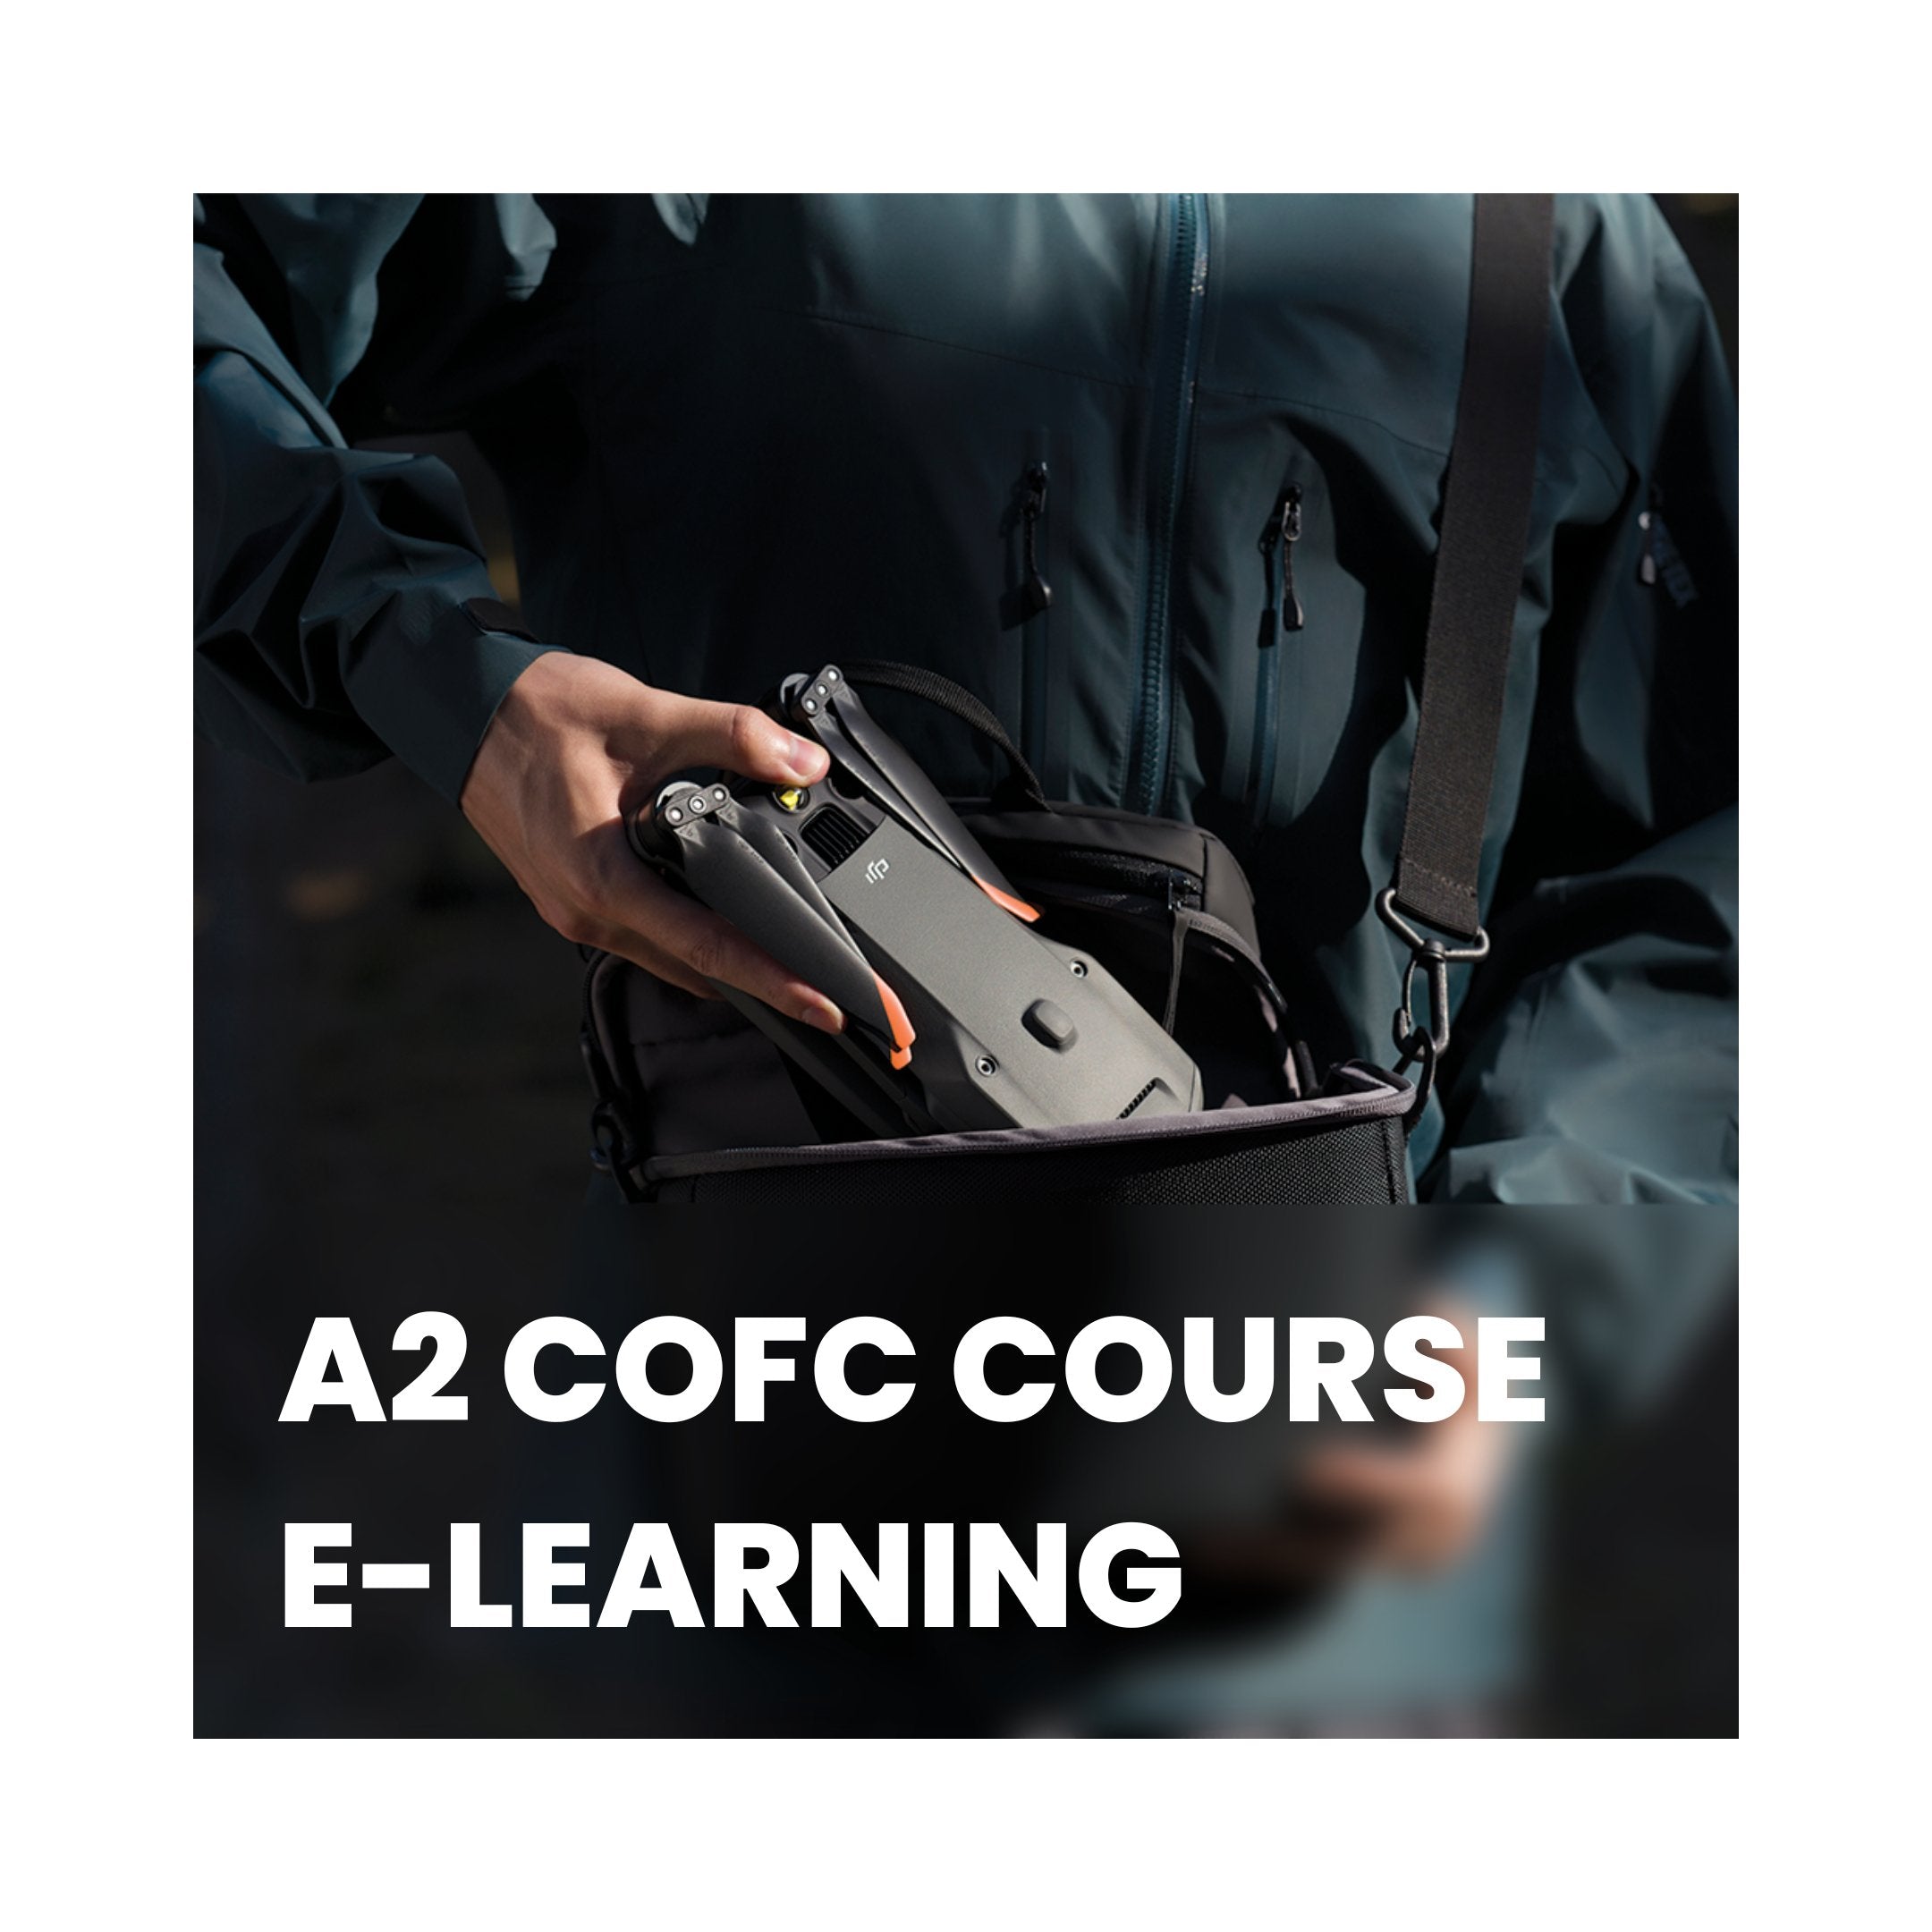 A2CofC Course (E-learning) - iRed Limited